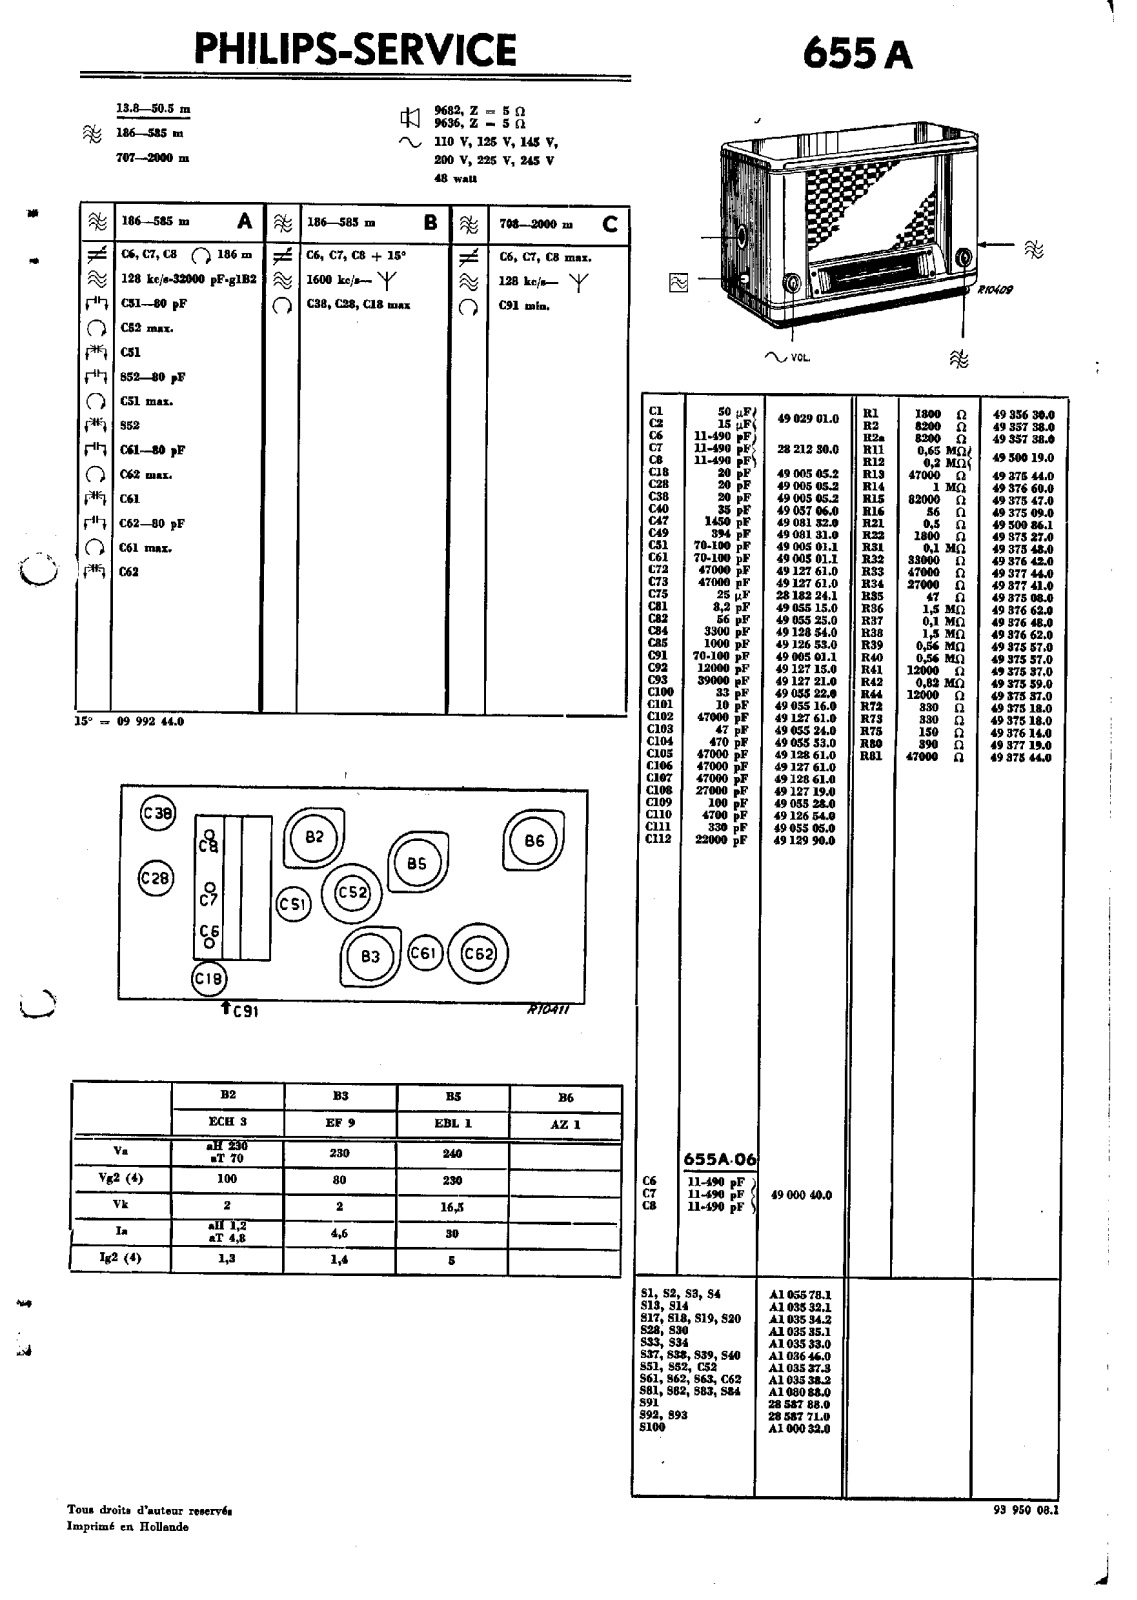 Philips 655-A Service Manual